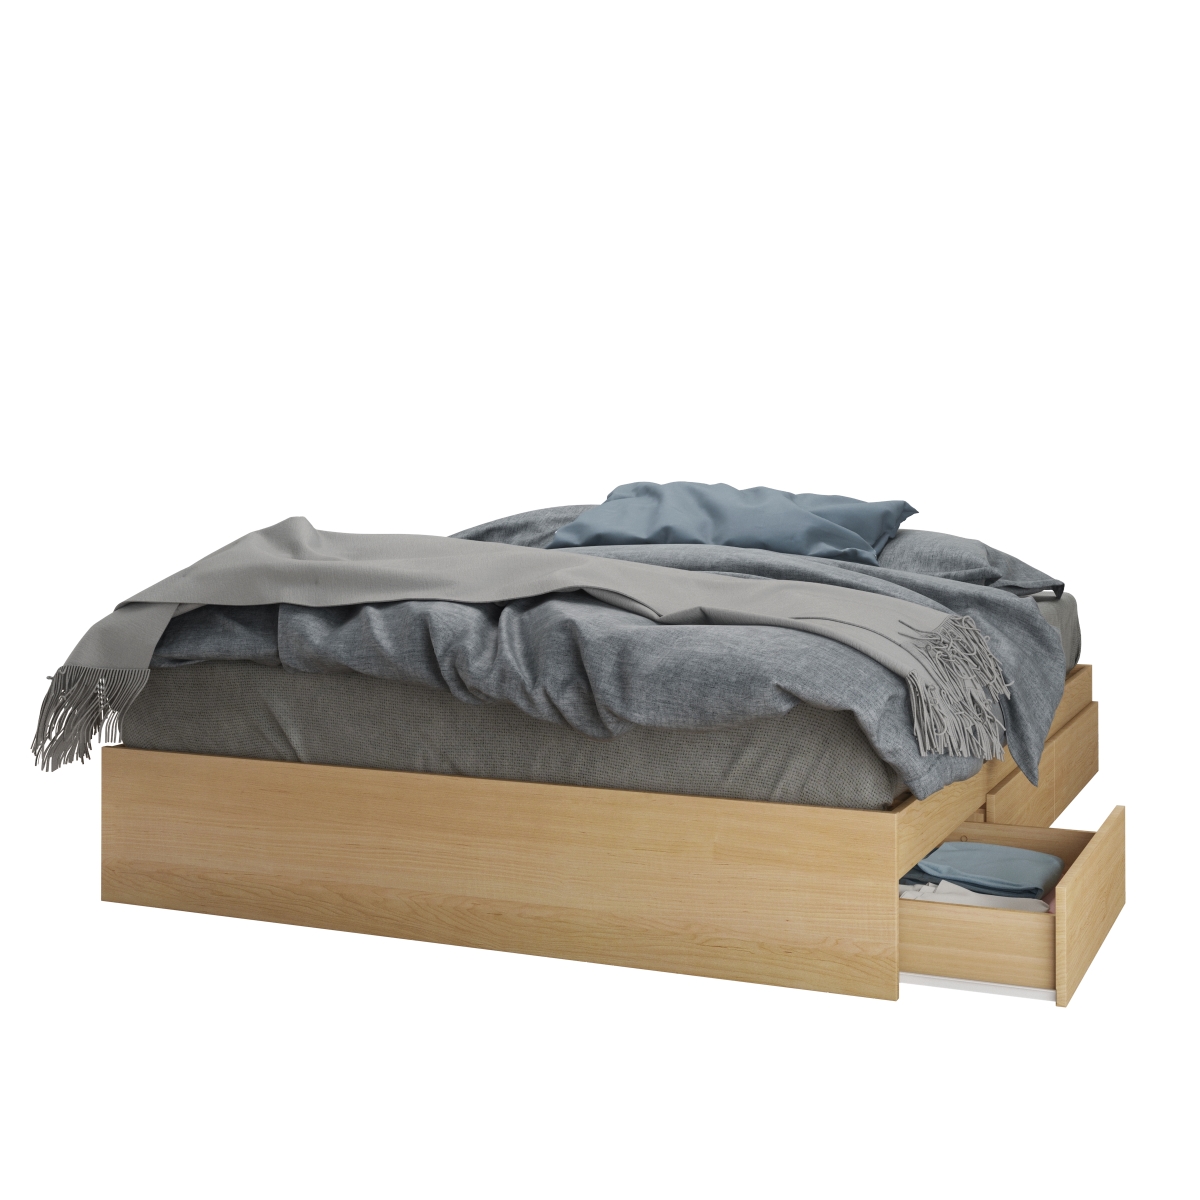 400949 Nomad Complete Bed Kit, Natural Maple Laminate & White Matte Lacquer - Queen Size